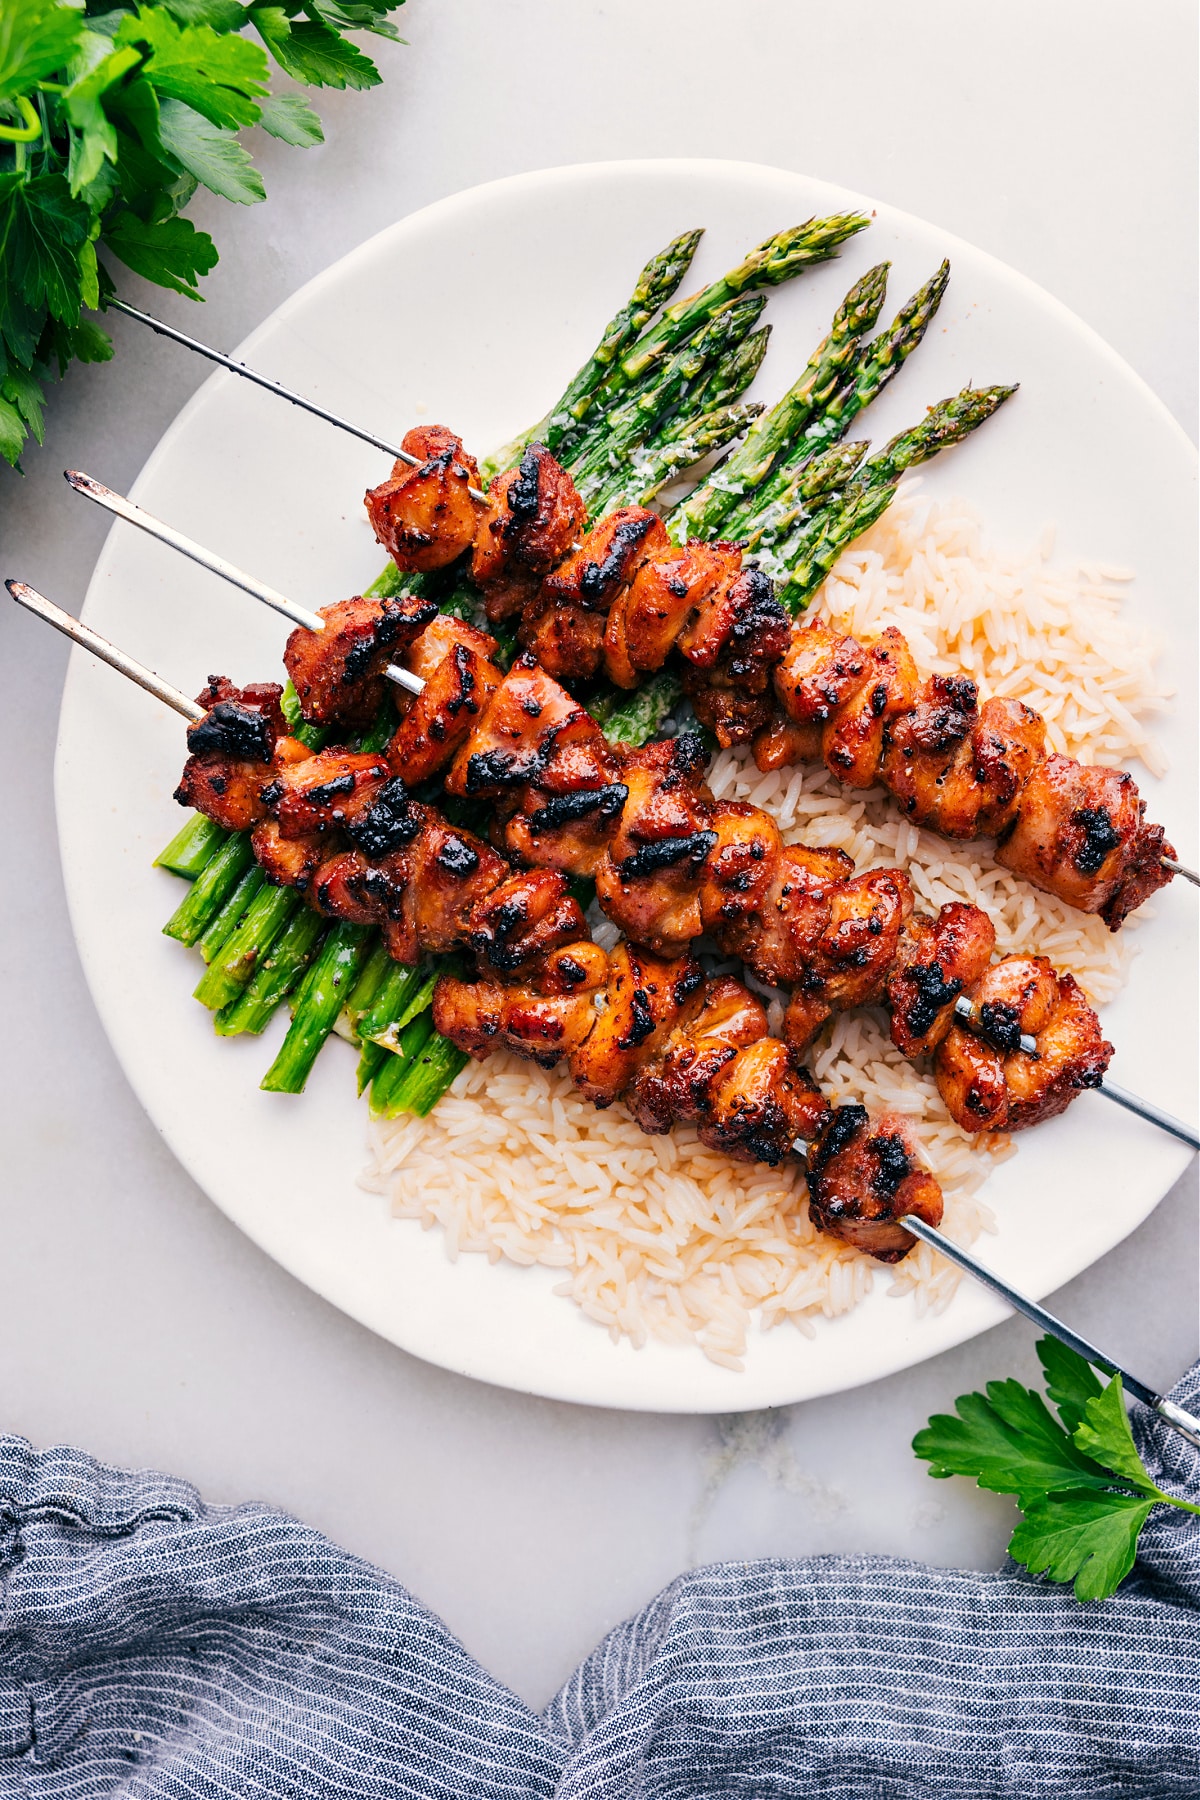 Baked Chicken Bites on skewers over rice and asparagus.